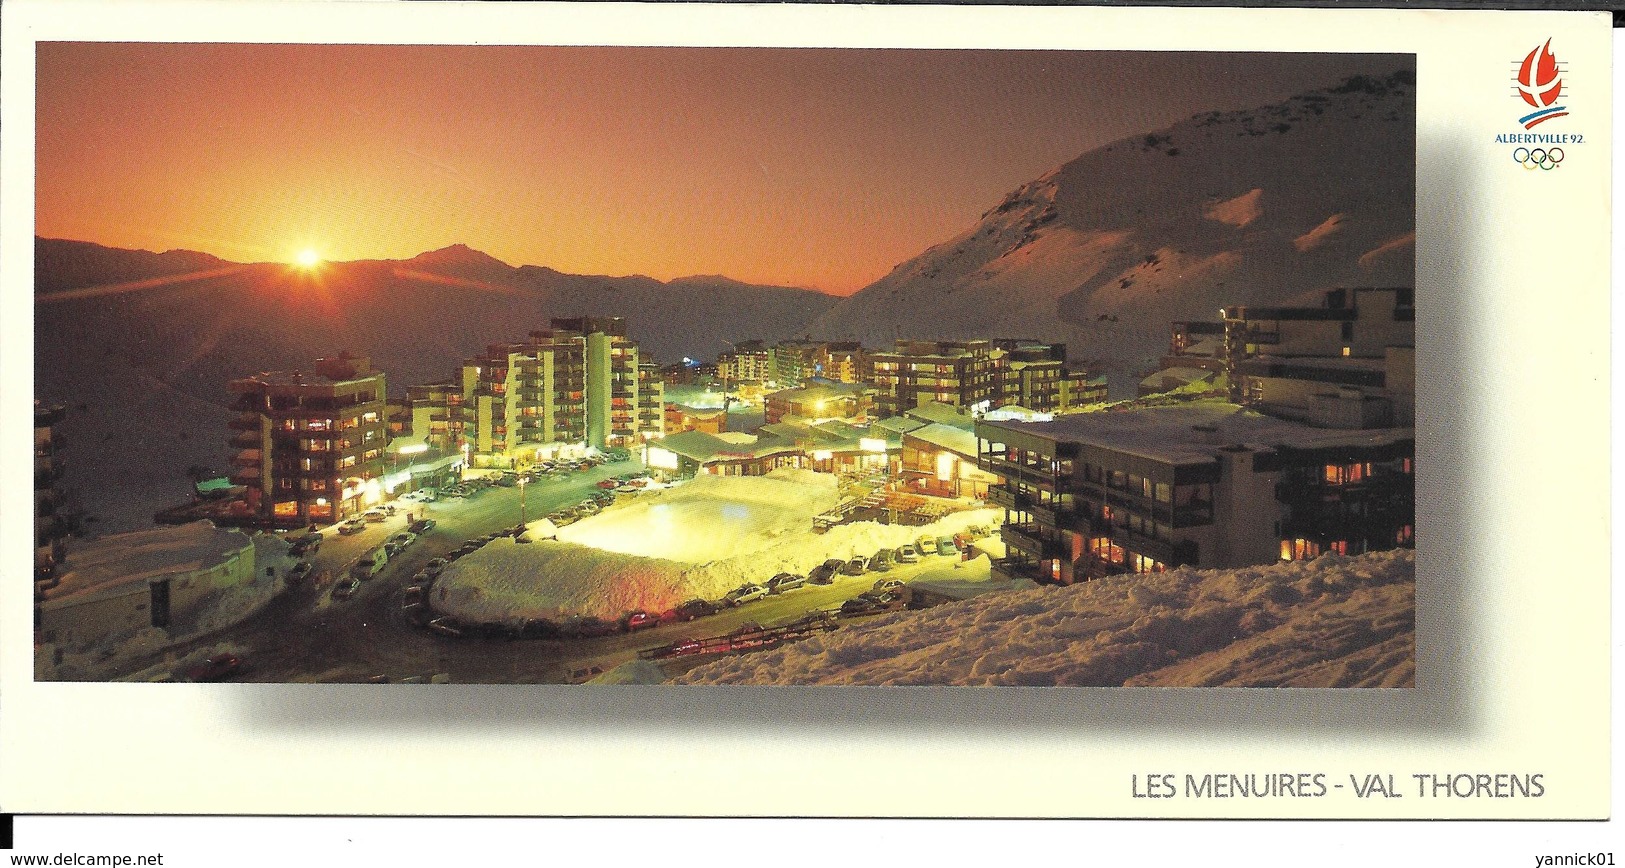 JEUX OLYMPIQUES HIVER - OLYMPICS WINTER GAMES ALBERTVILLE 1992 - LES MENUIRES VAL THORENS - STATION OLYMPIQUE - Jeux Olympiques